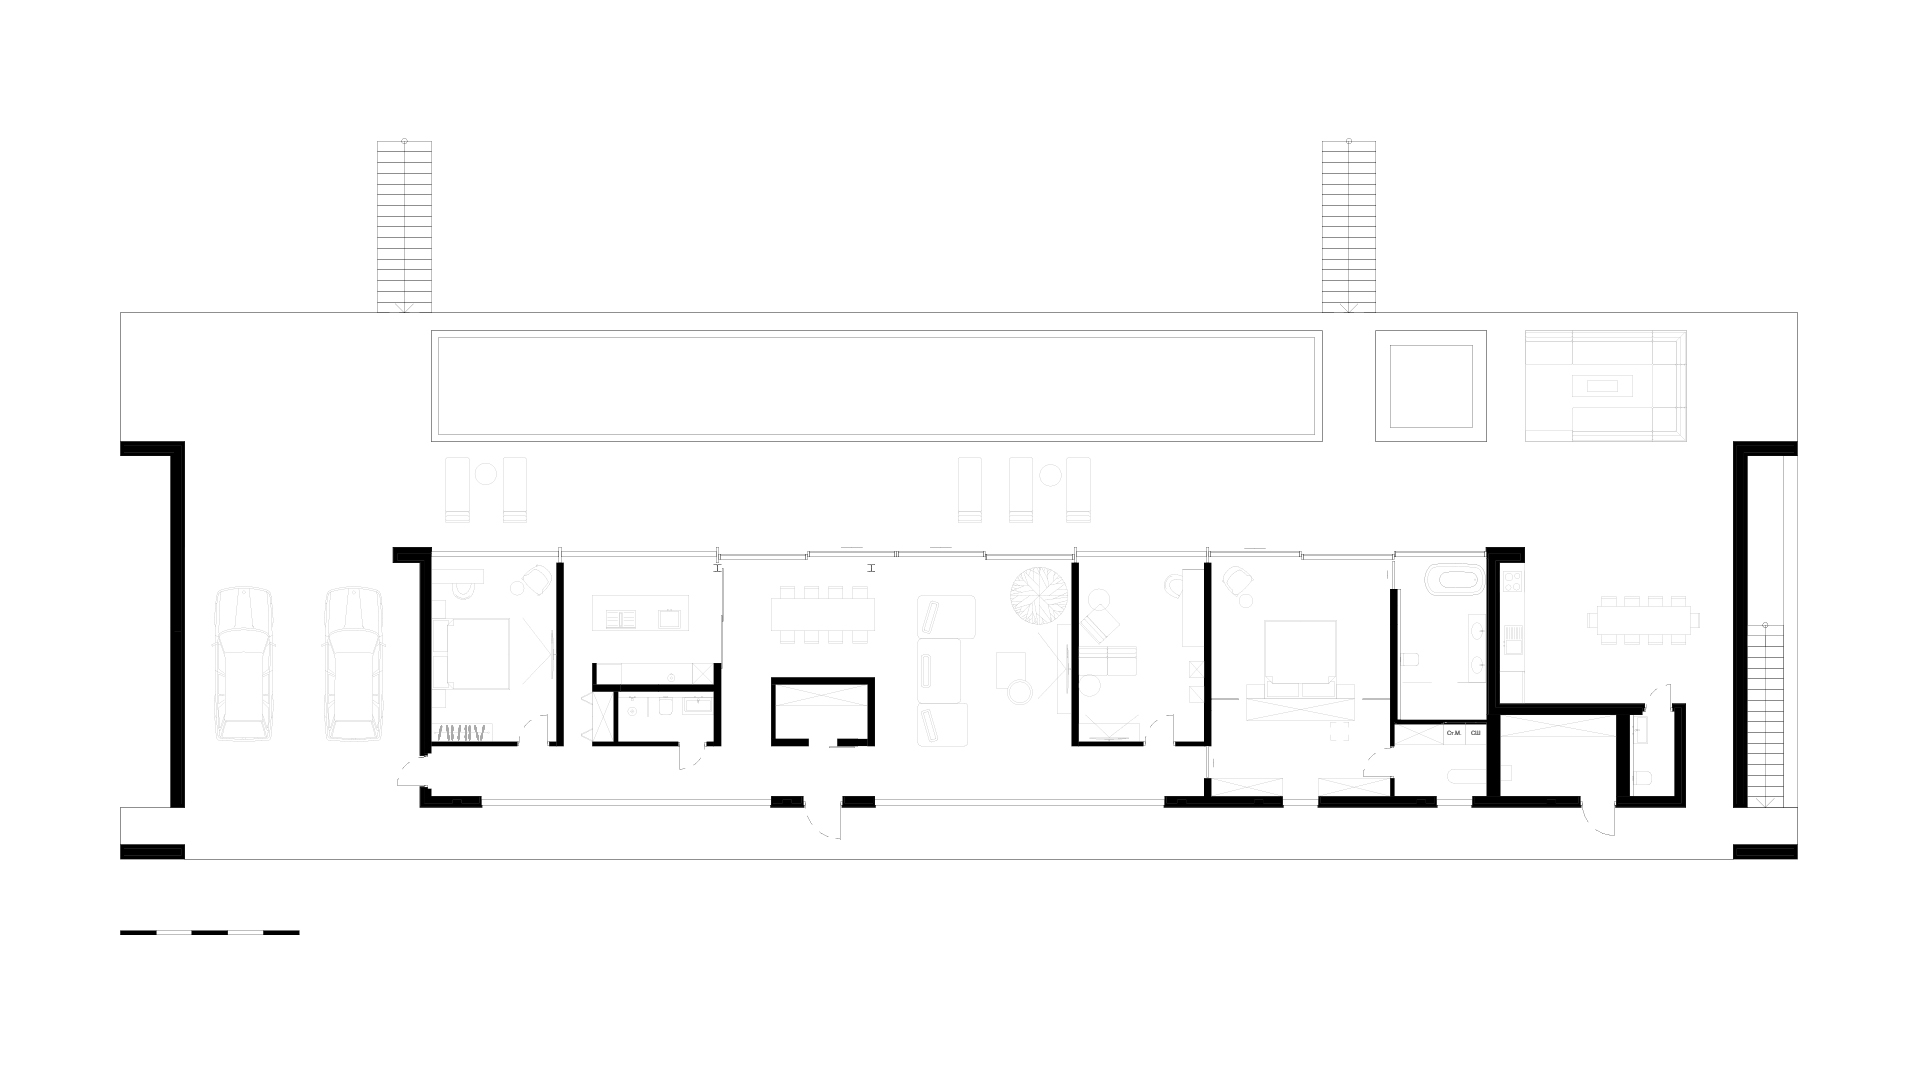 Room plan of a one-storey house